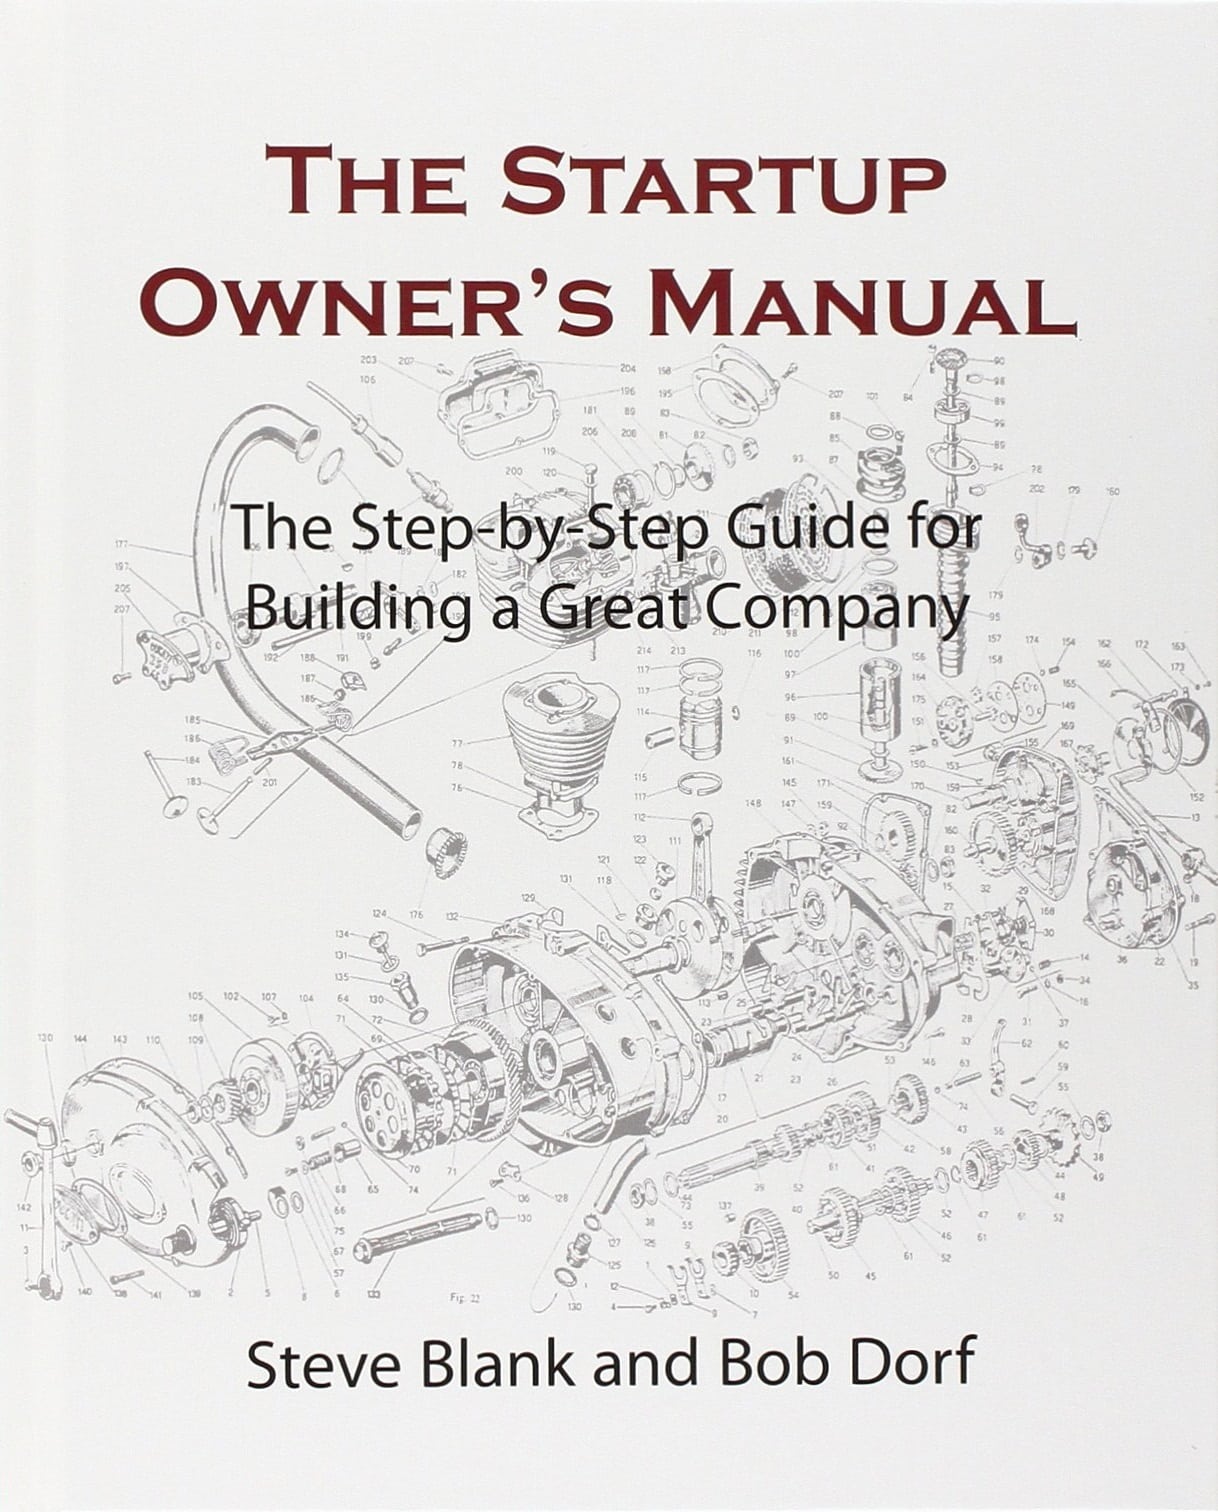 image of Steve Blank and Bob Dorf’s The Startup Owner’s Manual book cover